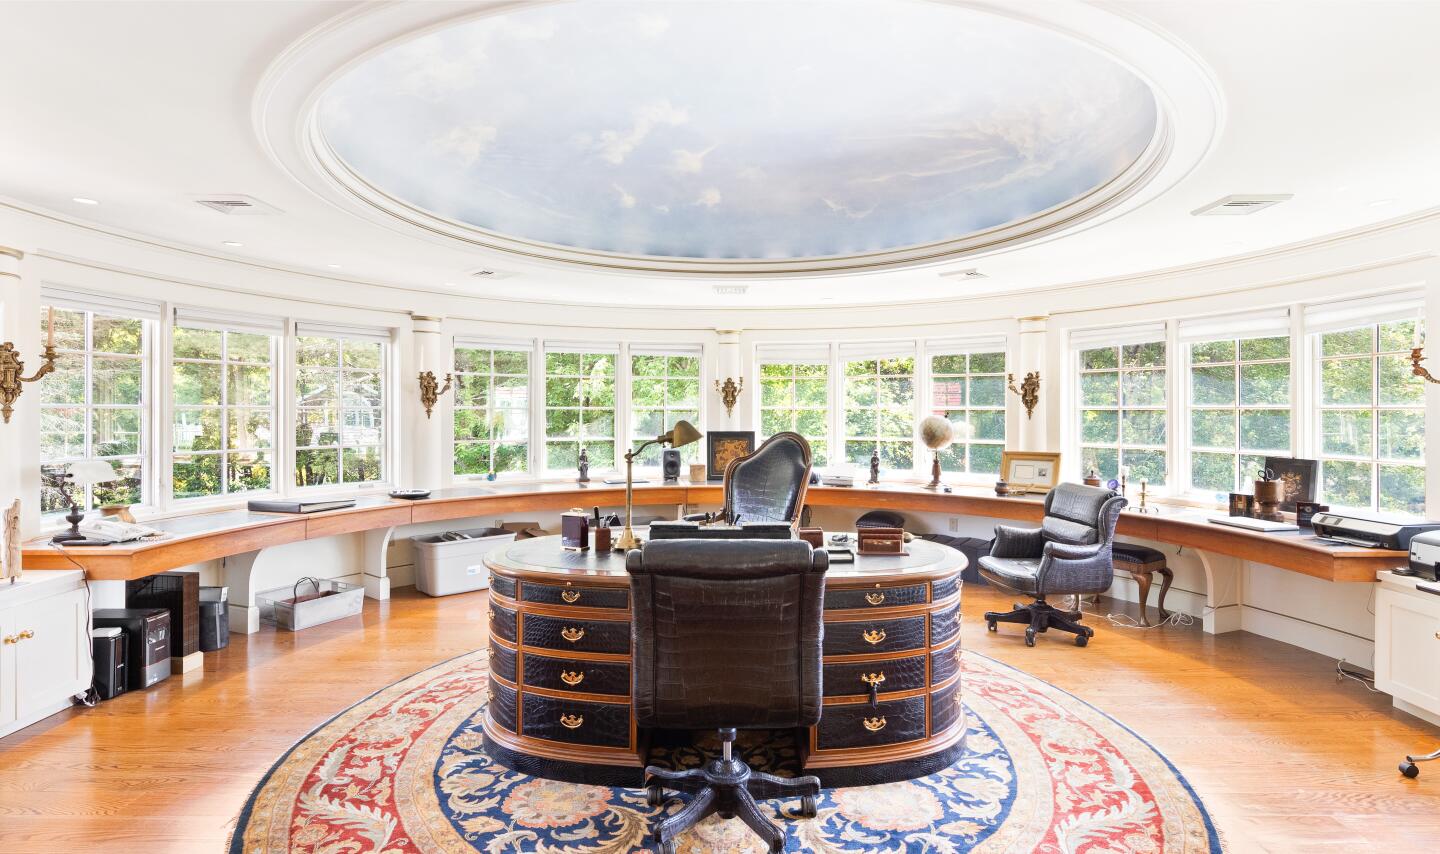 The oval office.